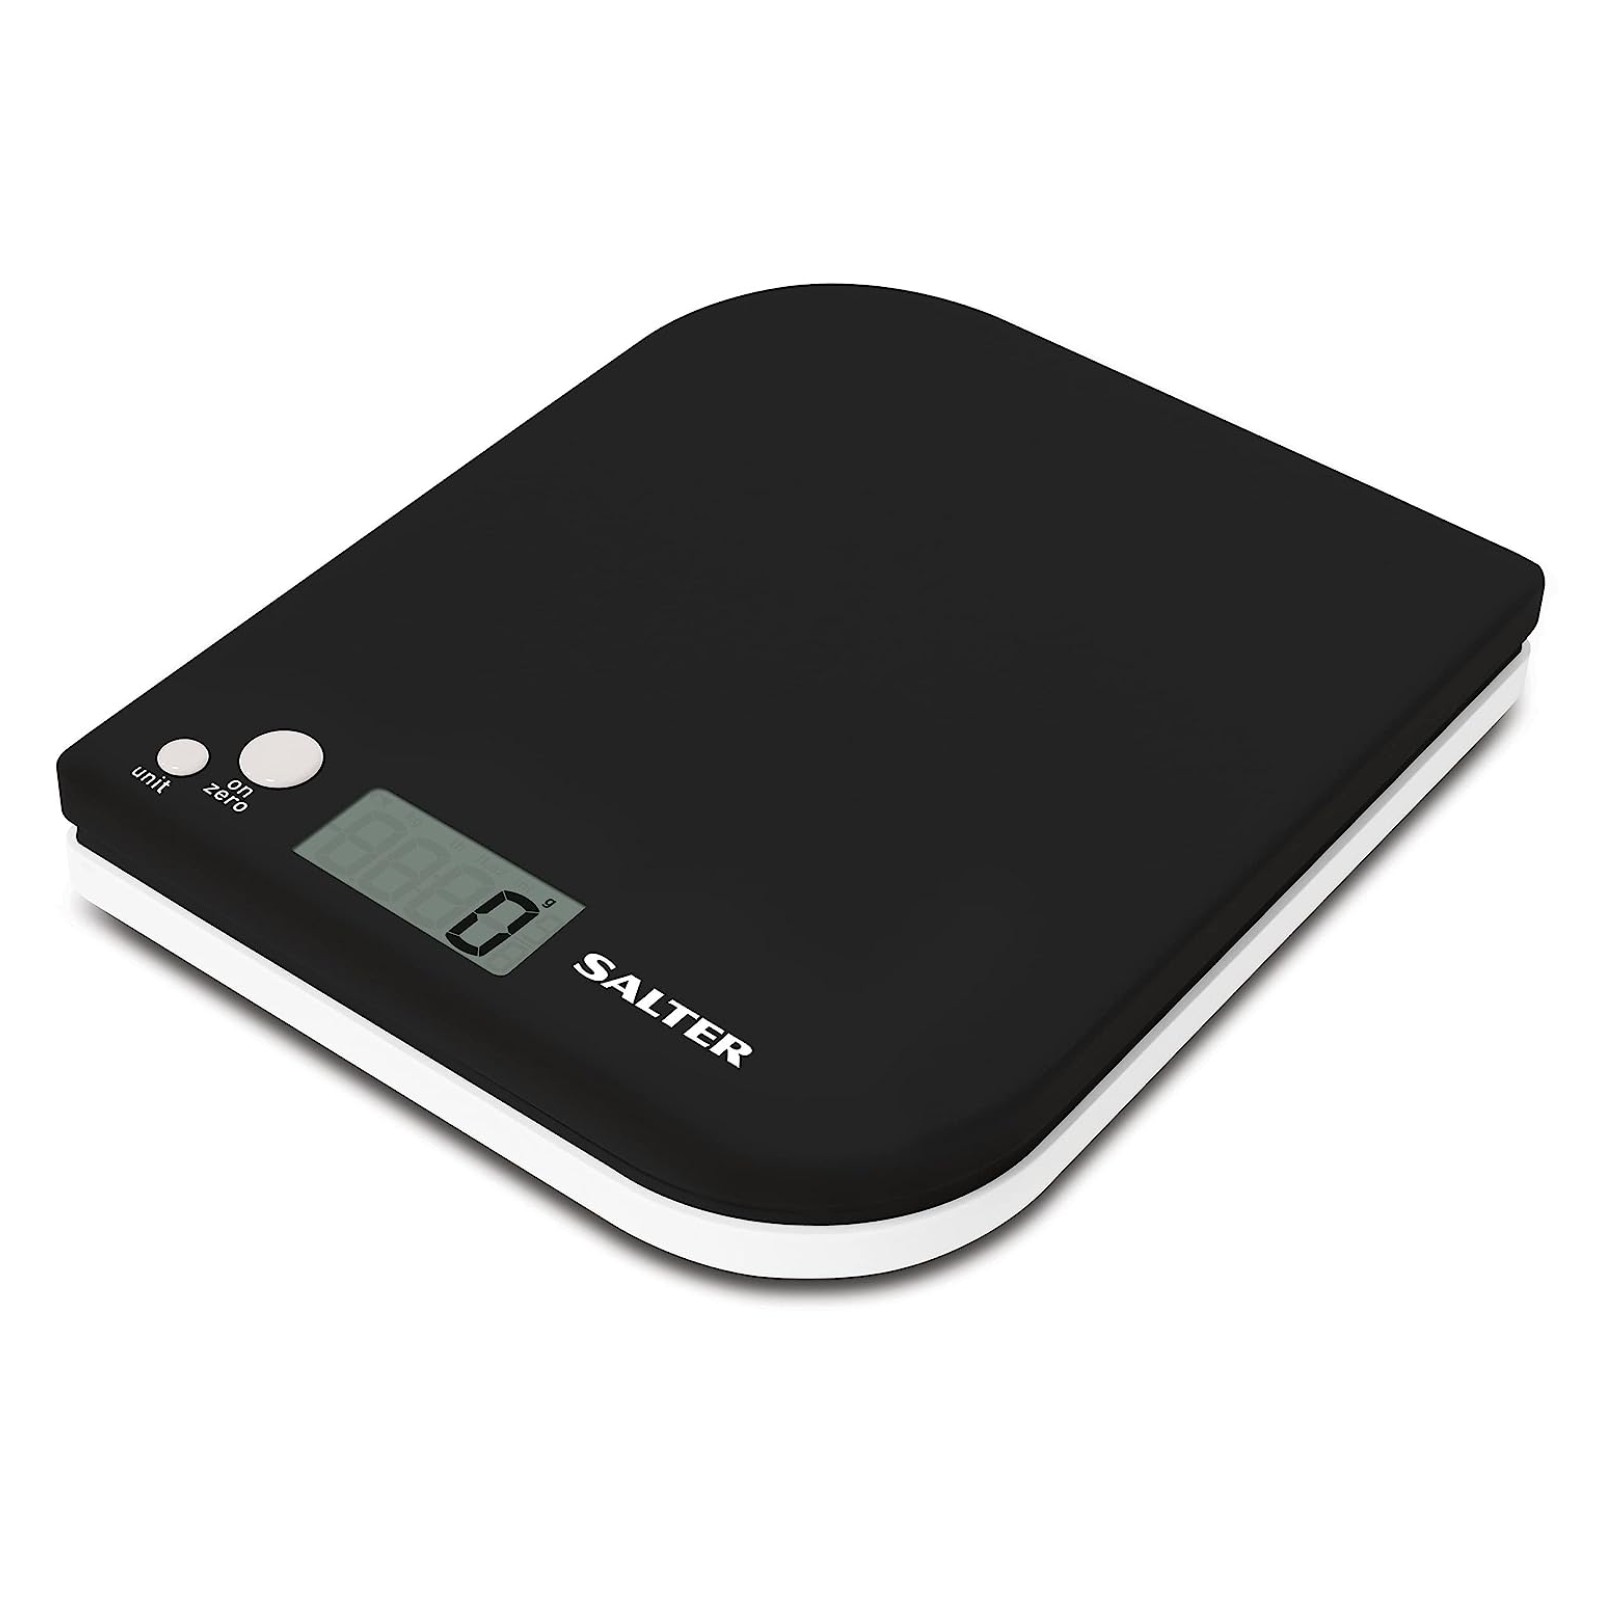 Salter 1177 Leaf Electronic Scale